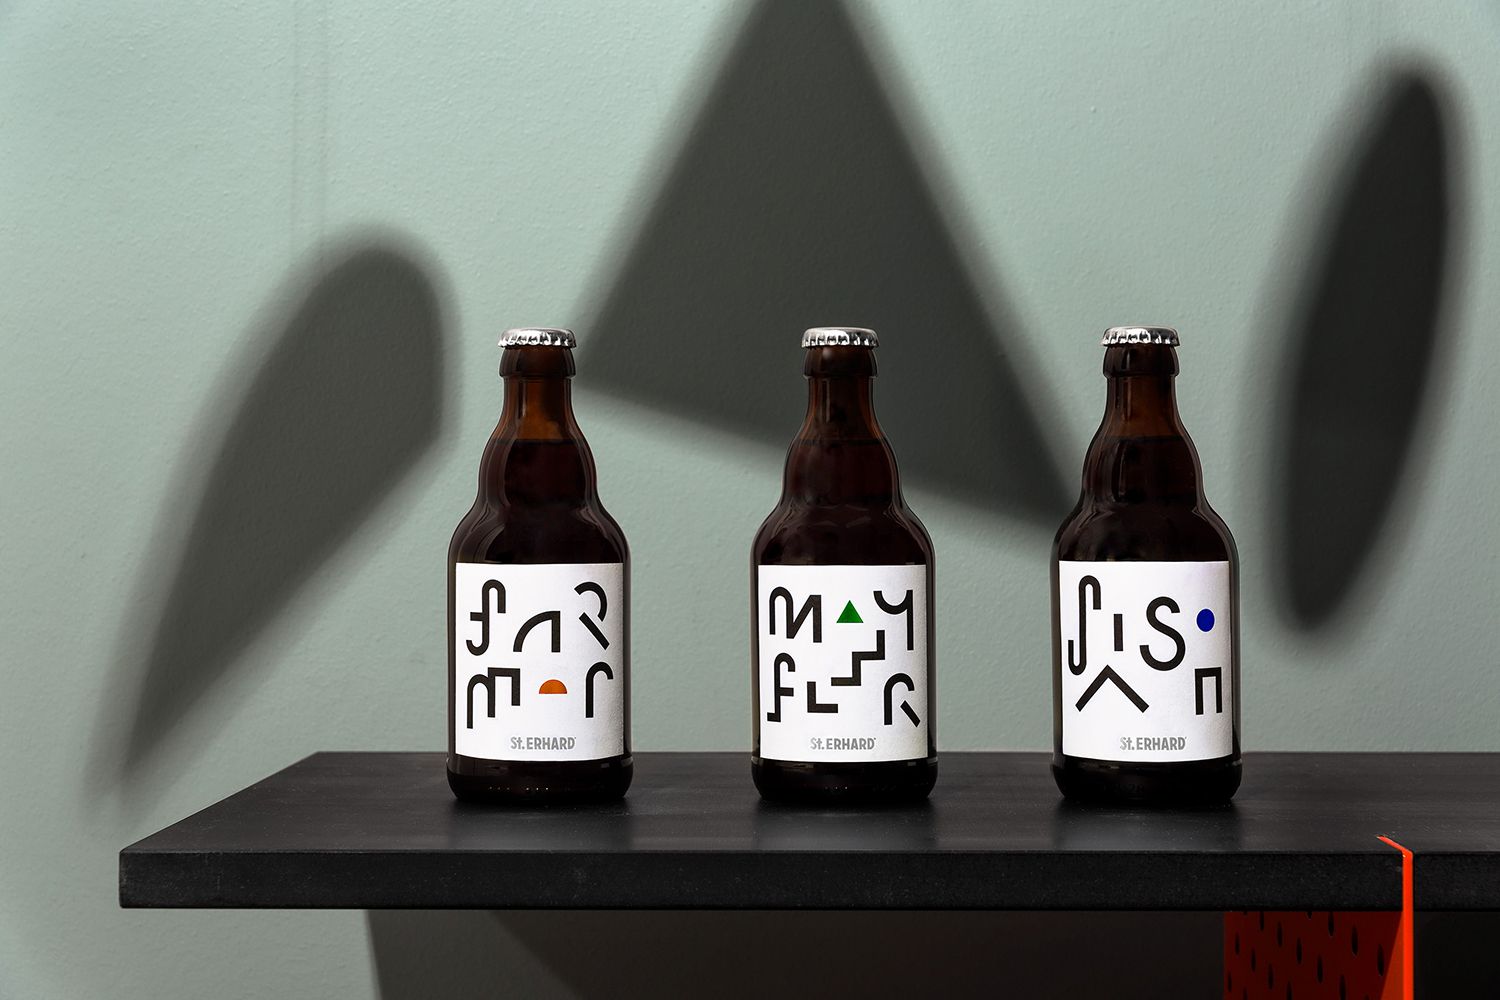 New label design by Swedish studio for three distinct beers from German brewery St Erhard